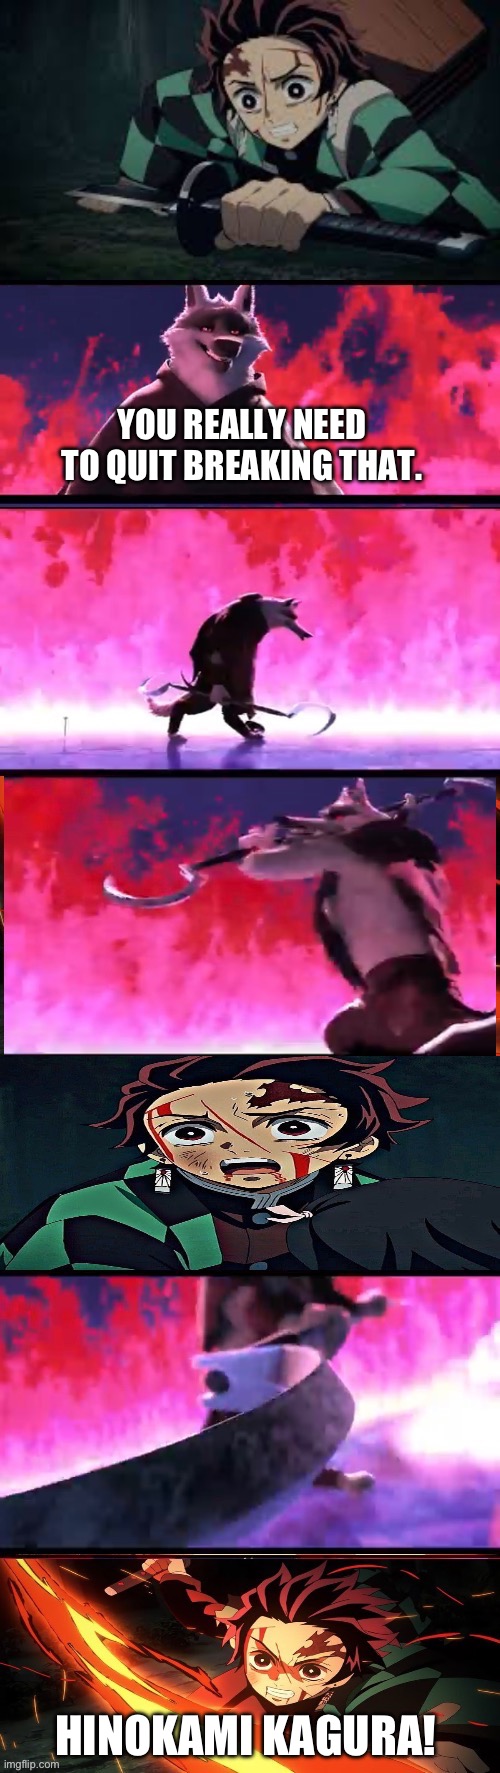 Tanjiro vs Death part 4 | YOU REALLY NEED TO QUIT BREAKING THAT. HINOKAMI KAGURA! | image tagged in meme | made w/ Imgflip meme maker